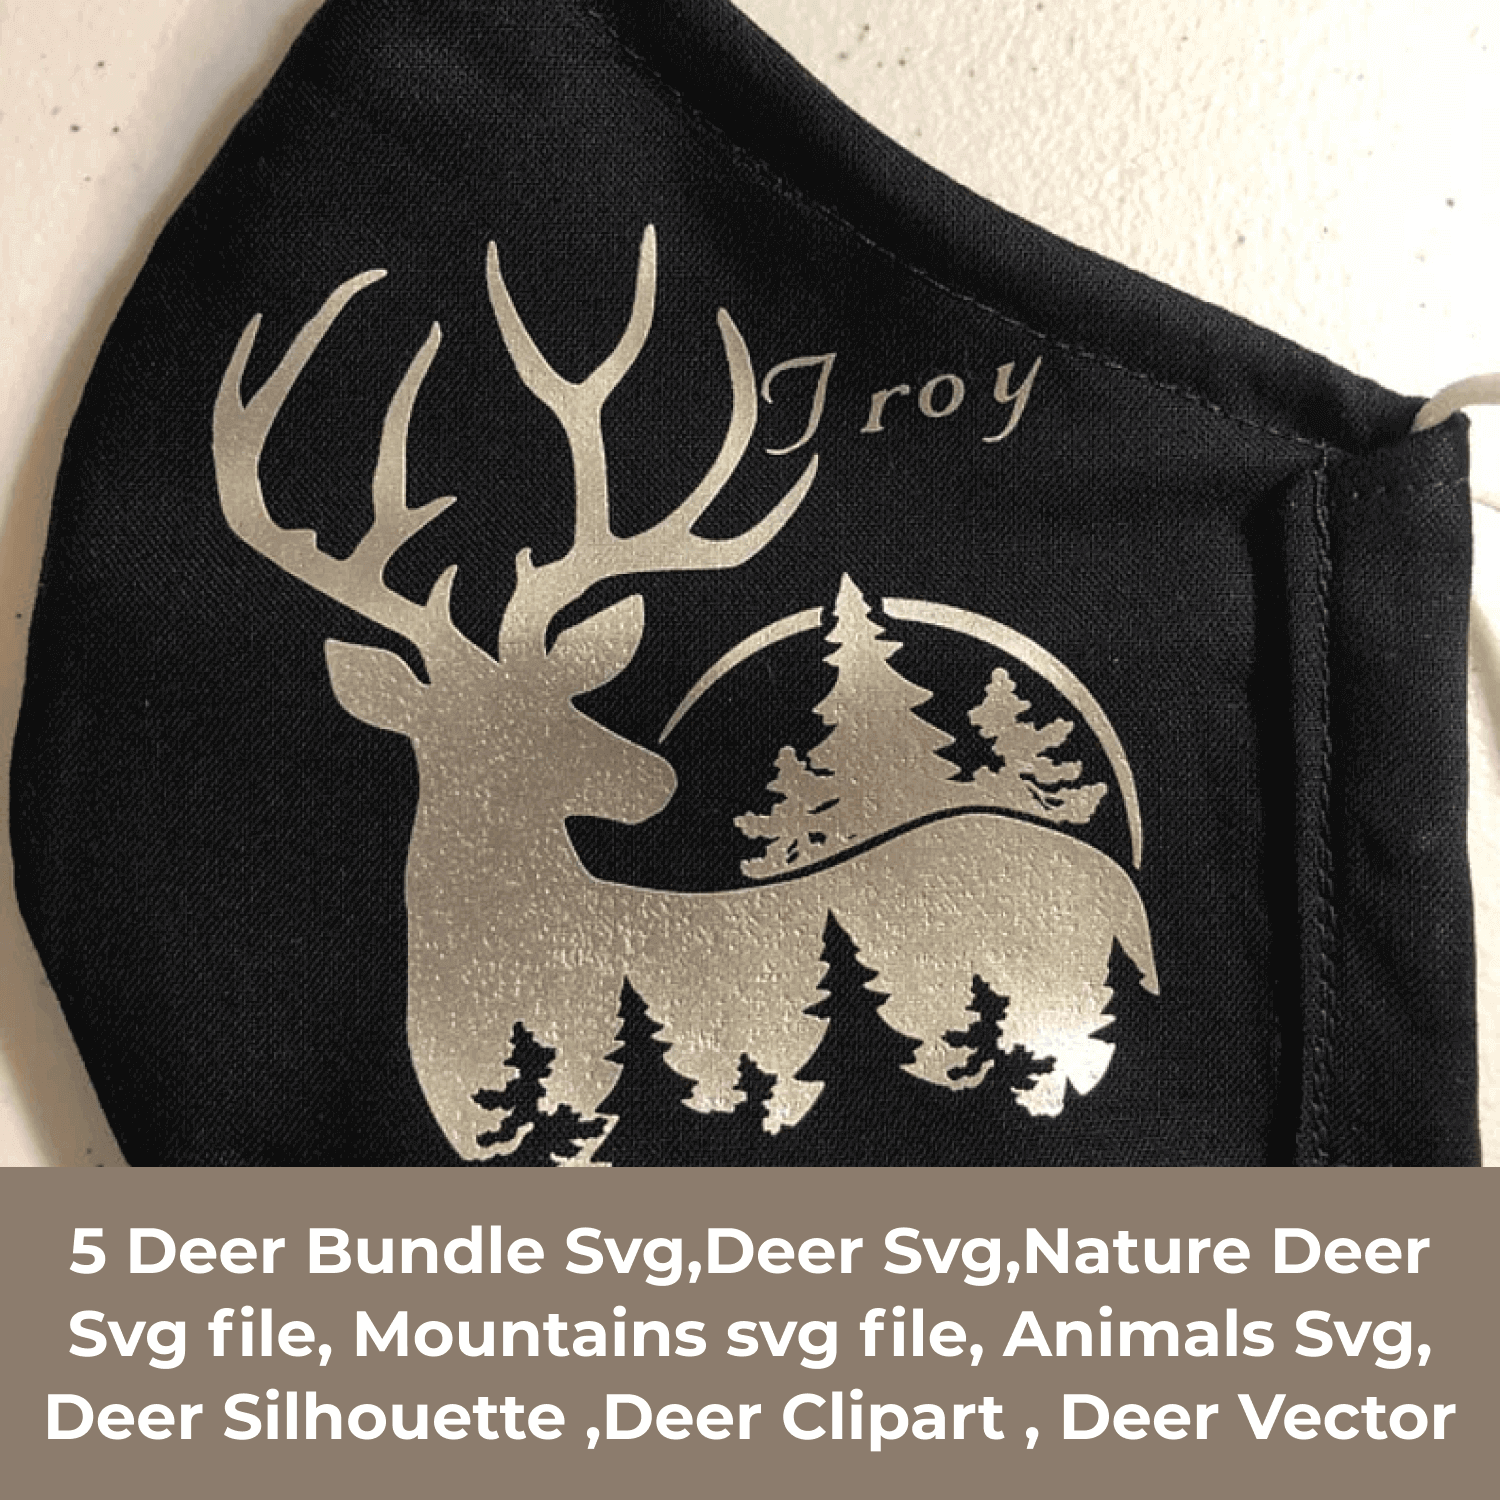 Black face mask with a deer and pine trees on it.